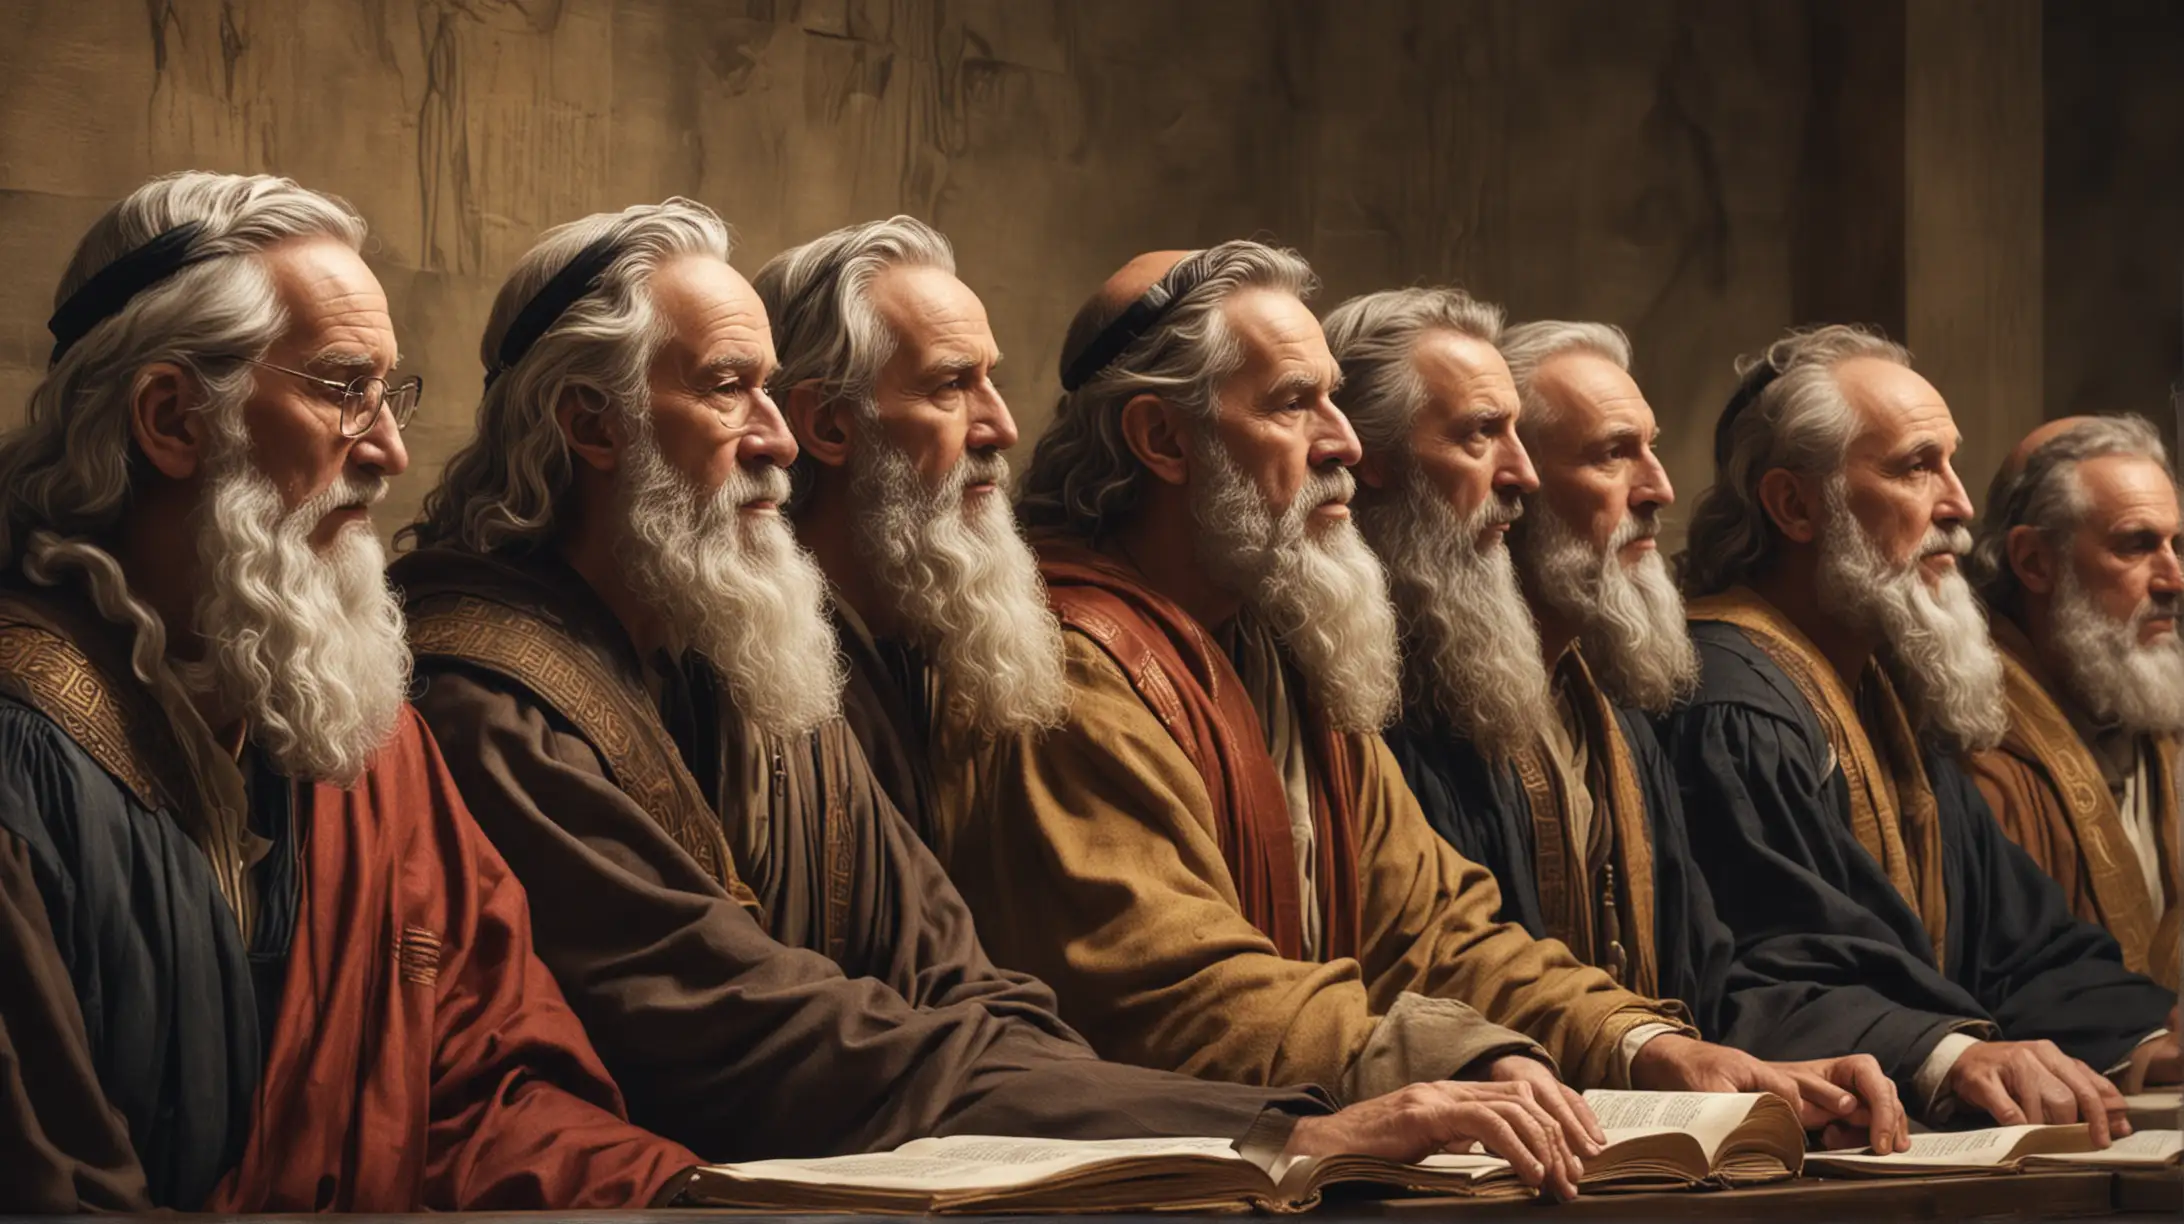 a close up image depicting a council of judges  During the era of  the Biblcal Moses.